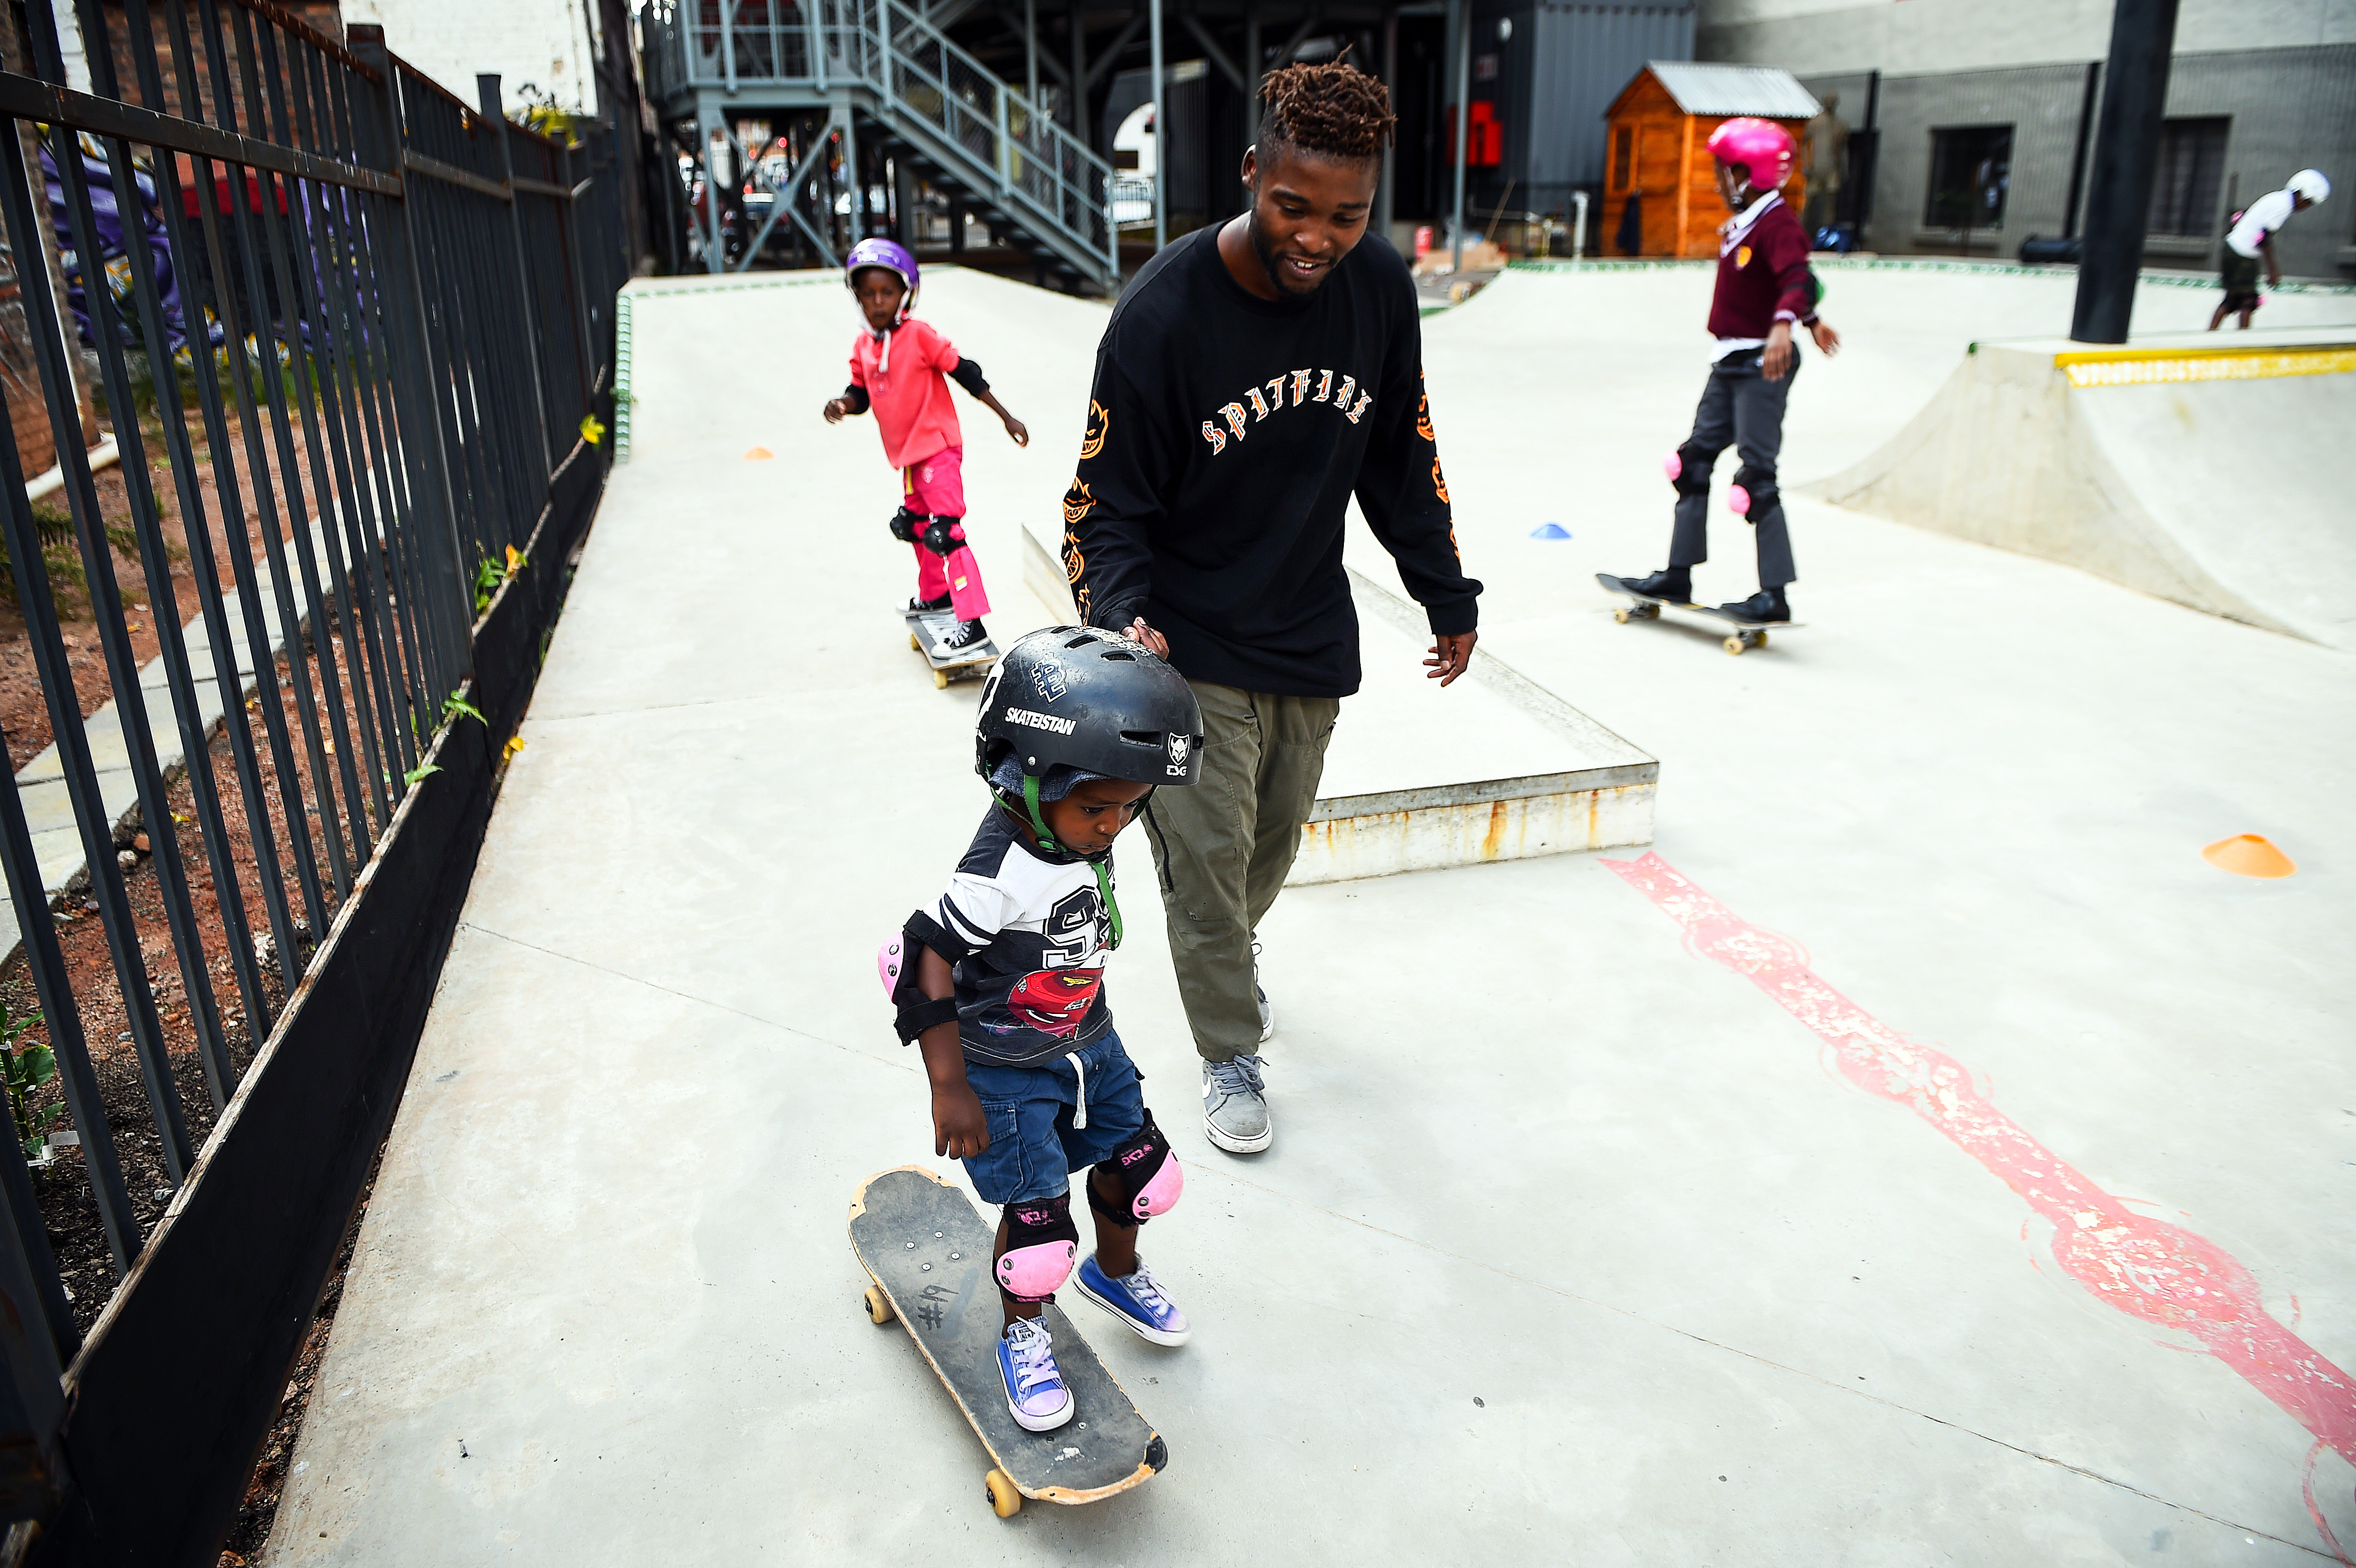 Educator helps a young child to skate